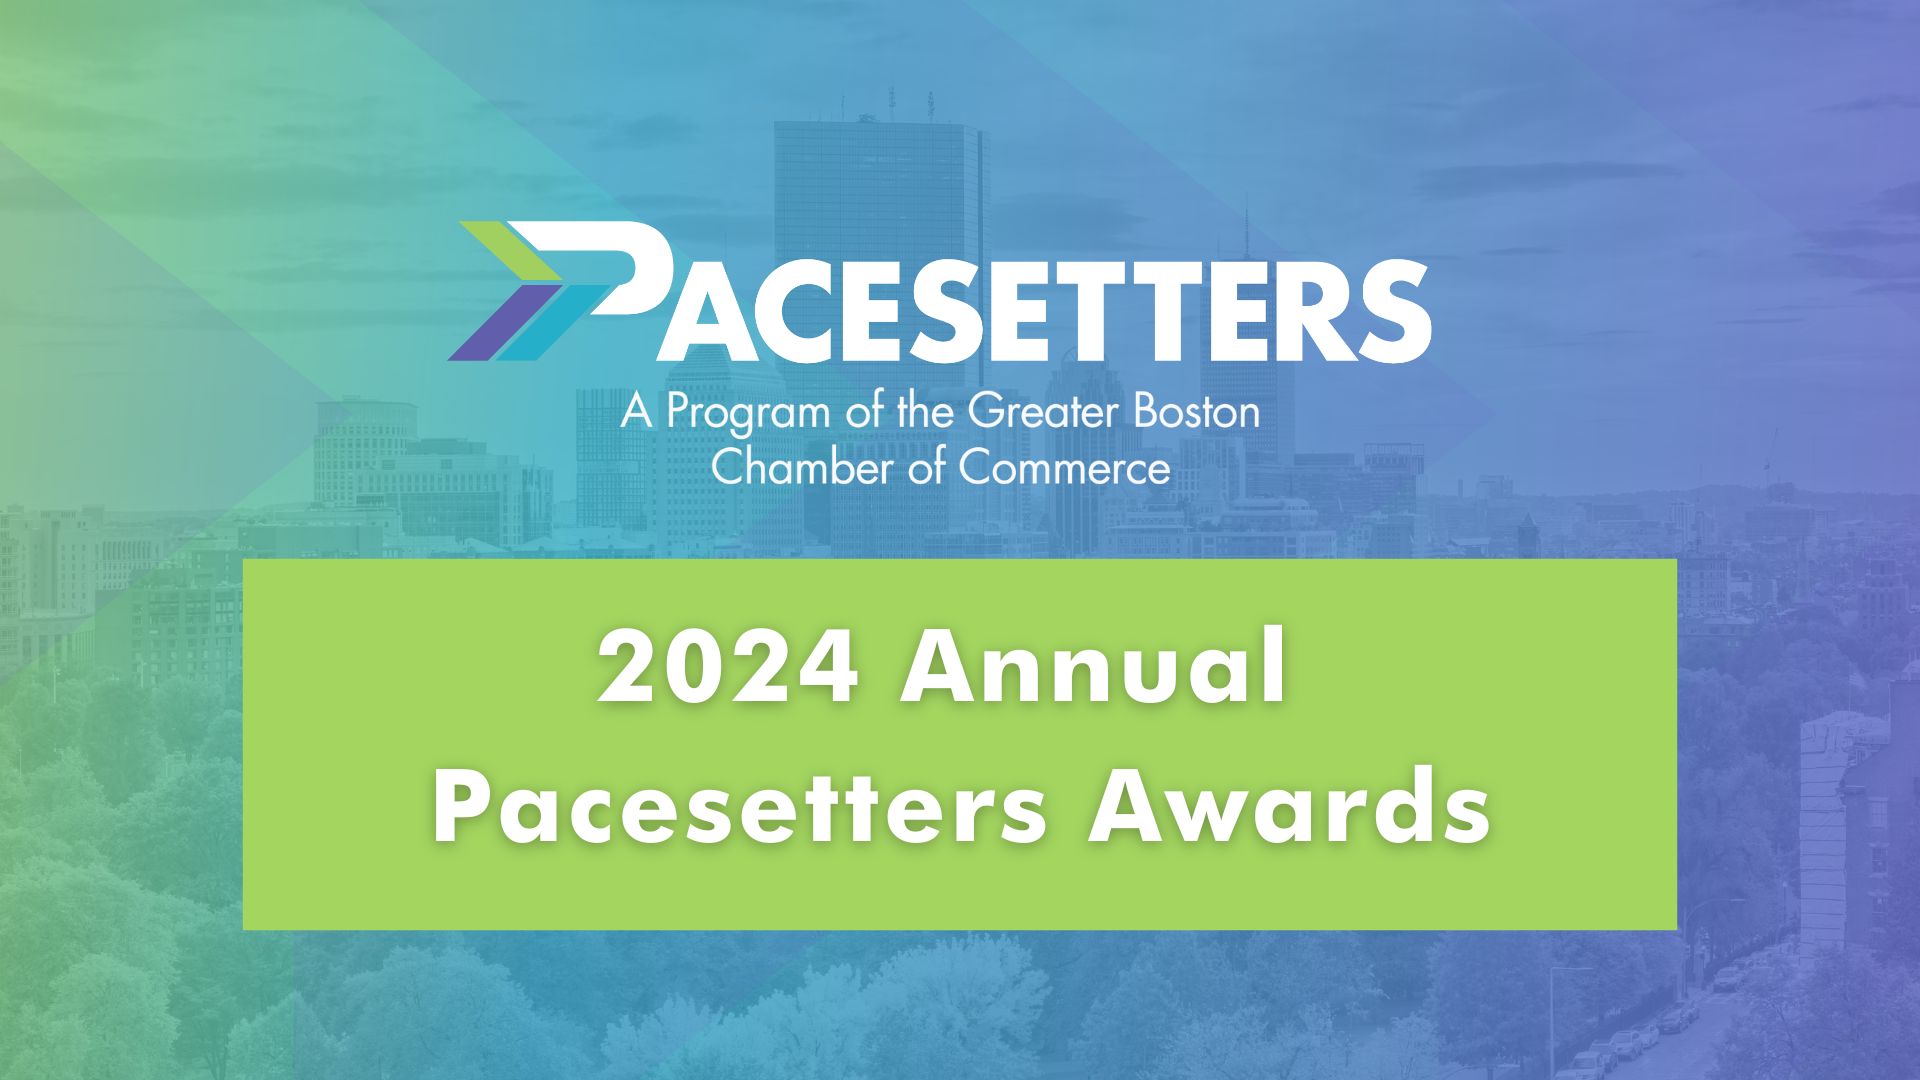 2024 Annual Pacesetters Awards